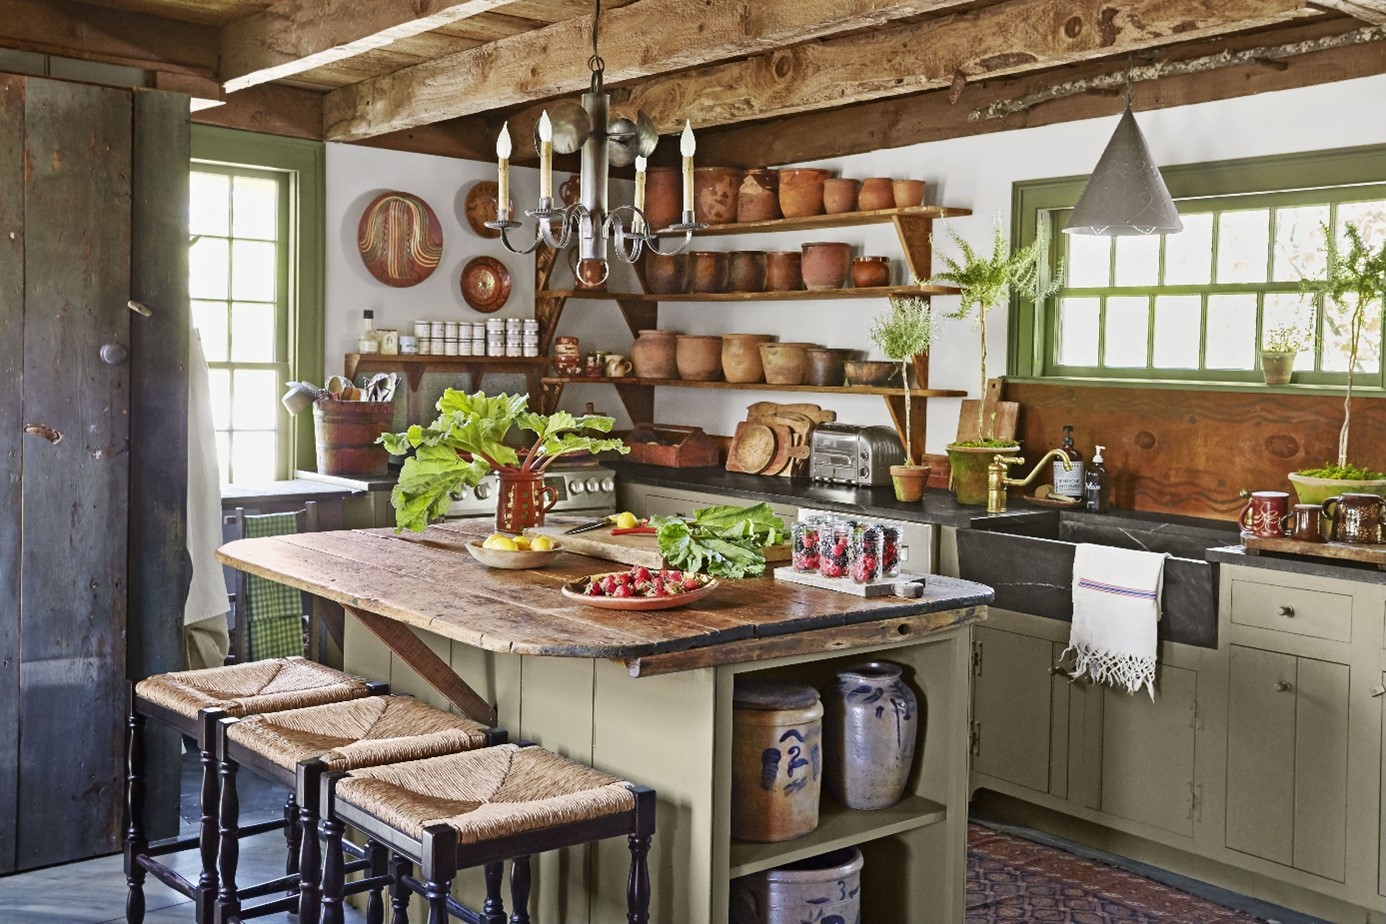 Ranch Kitchen Decor and Accessories